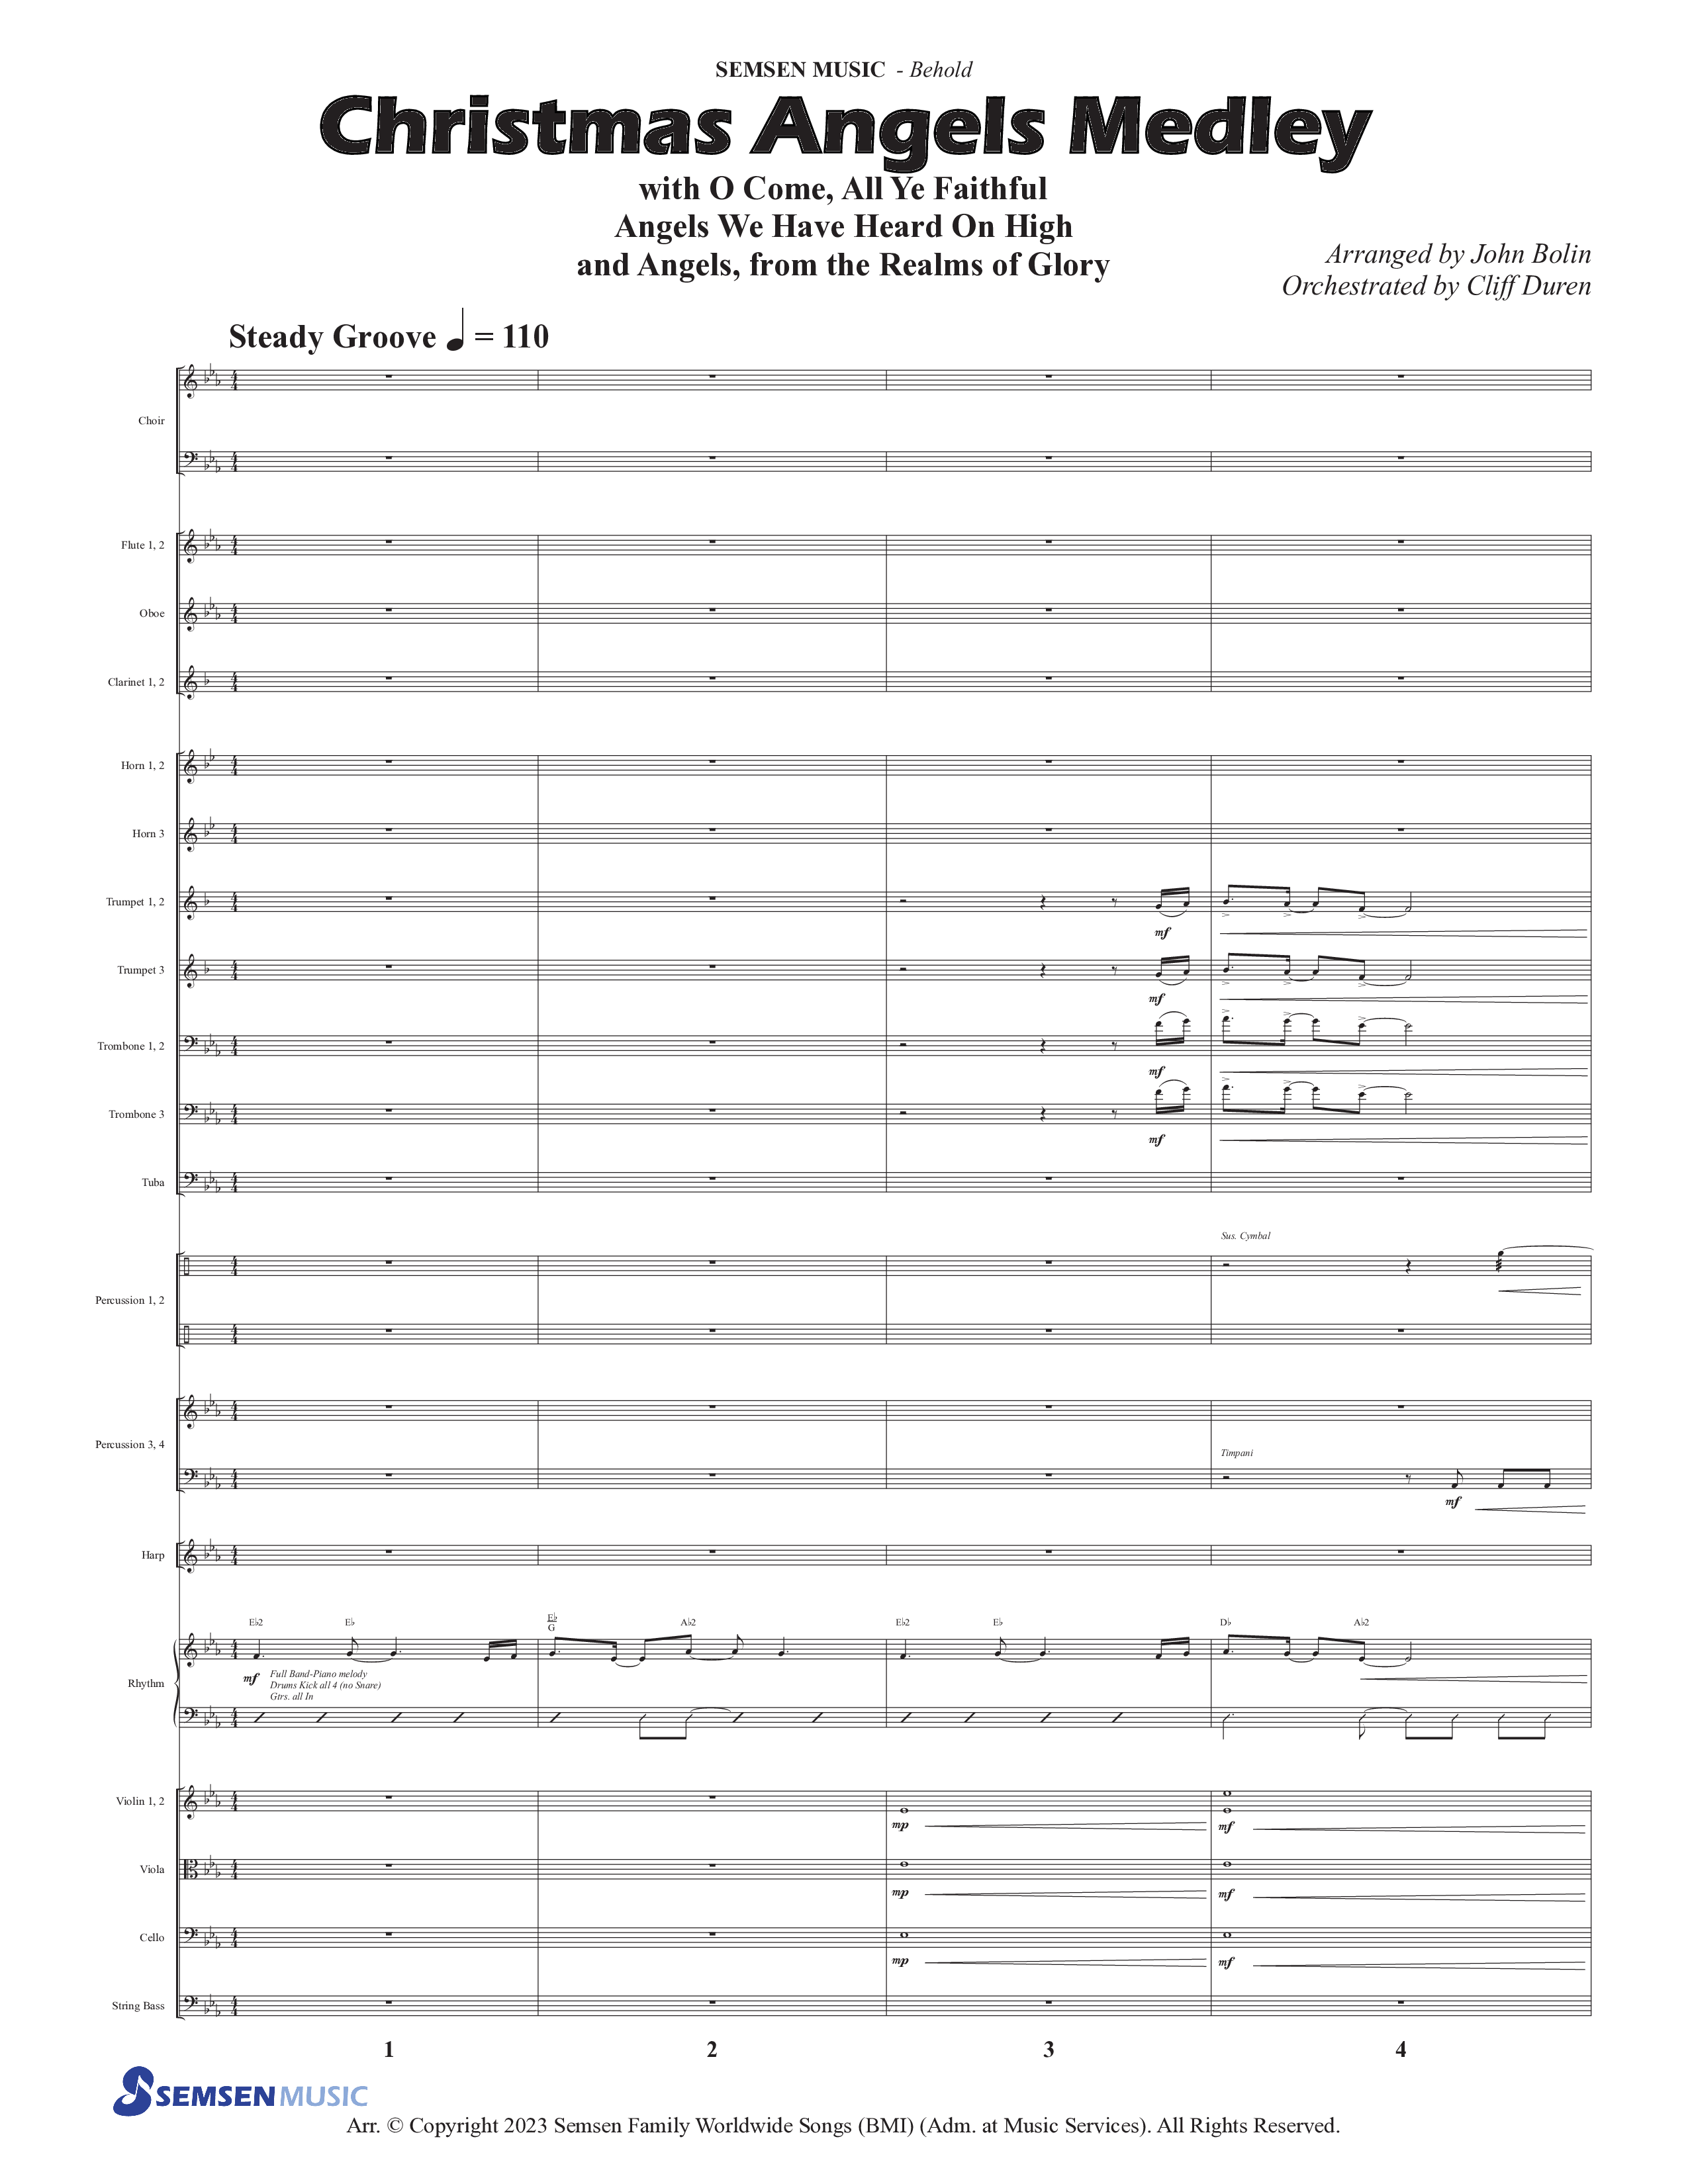 Behold (9 Song Choral Collection) Song 2 (Orchestration) (Semsen Music / Arr. John Bolin / Orch. Cliff Duren)